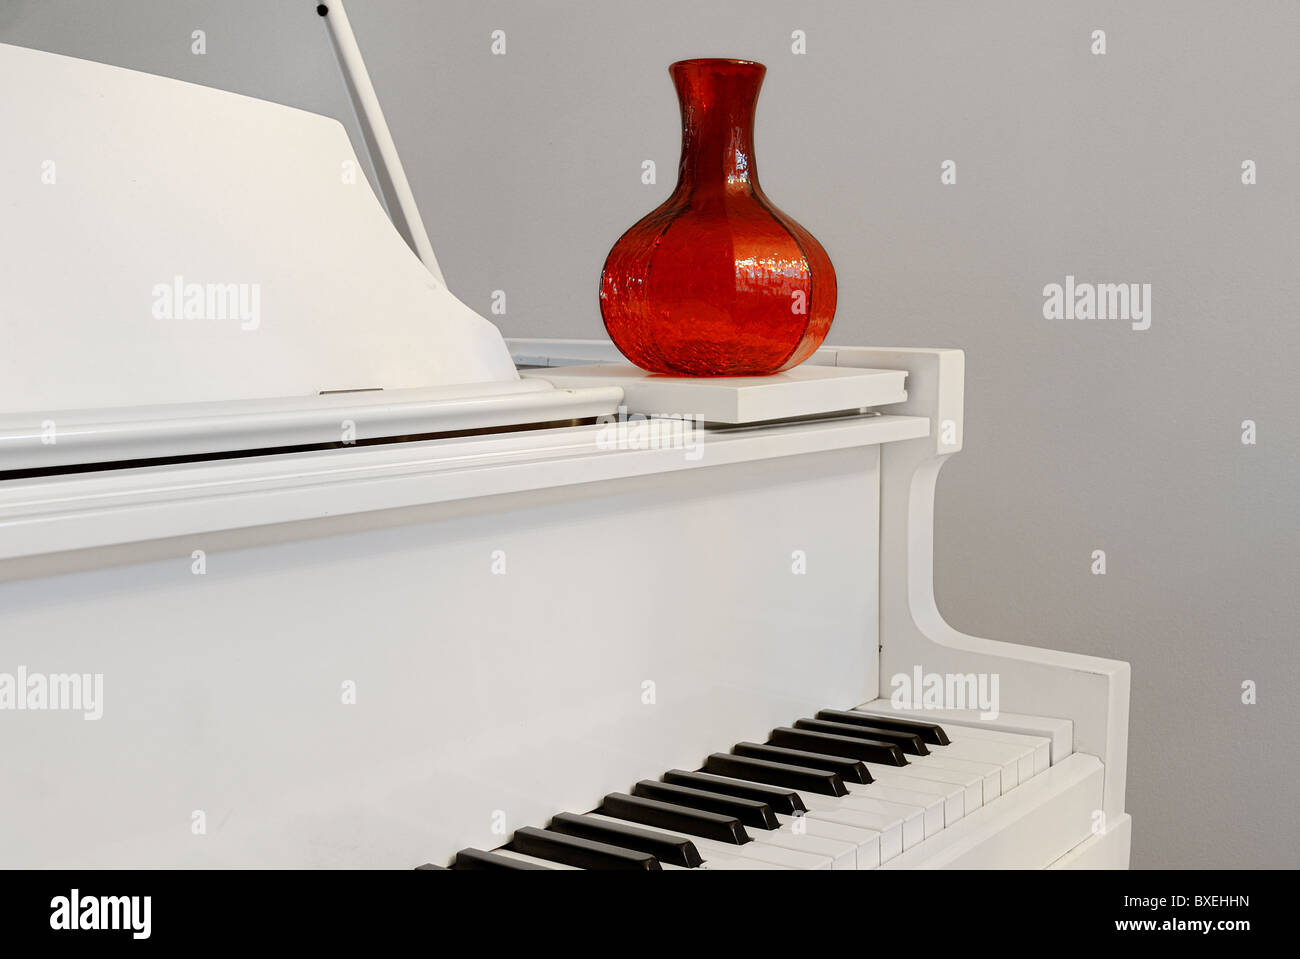 Corner of a piano with a red vase in a home interior. Stock Photo